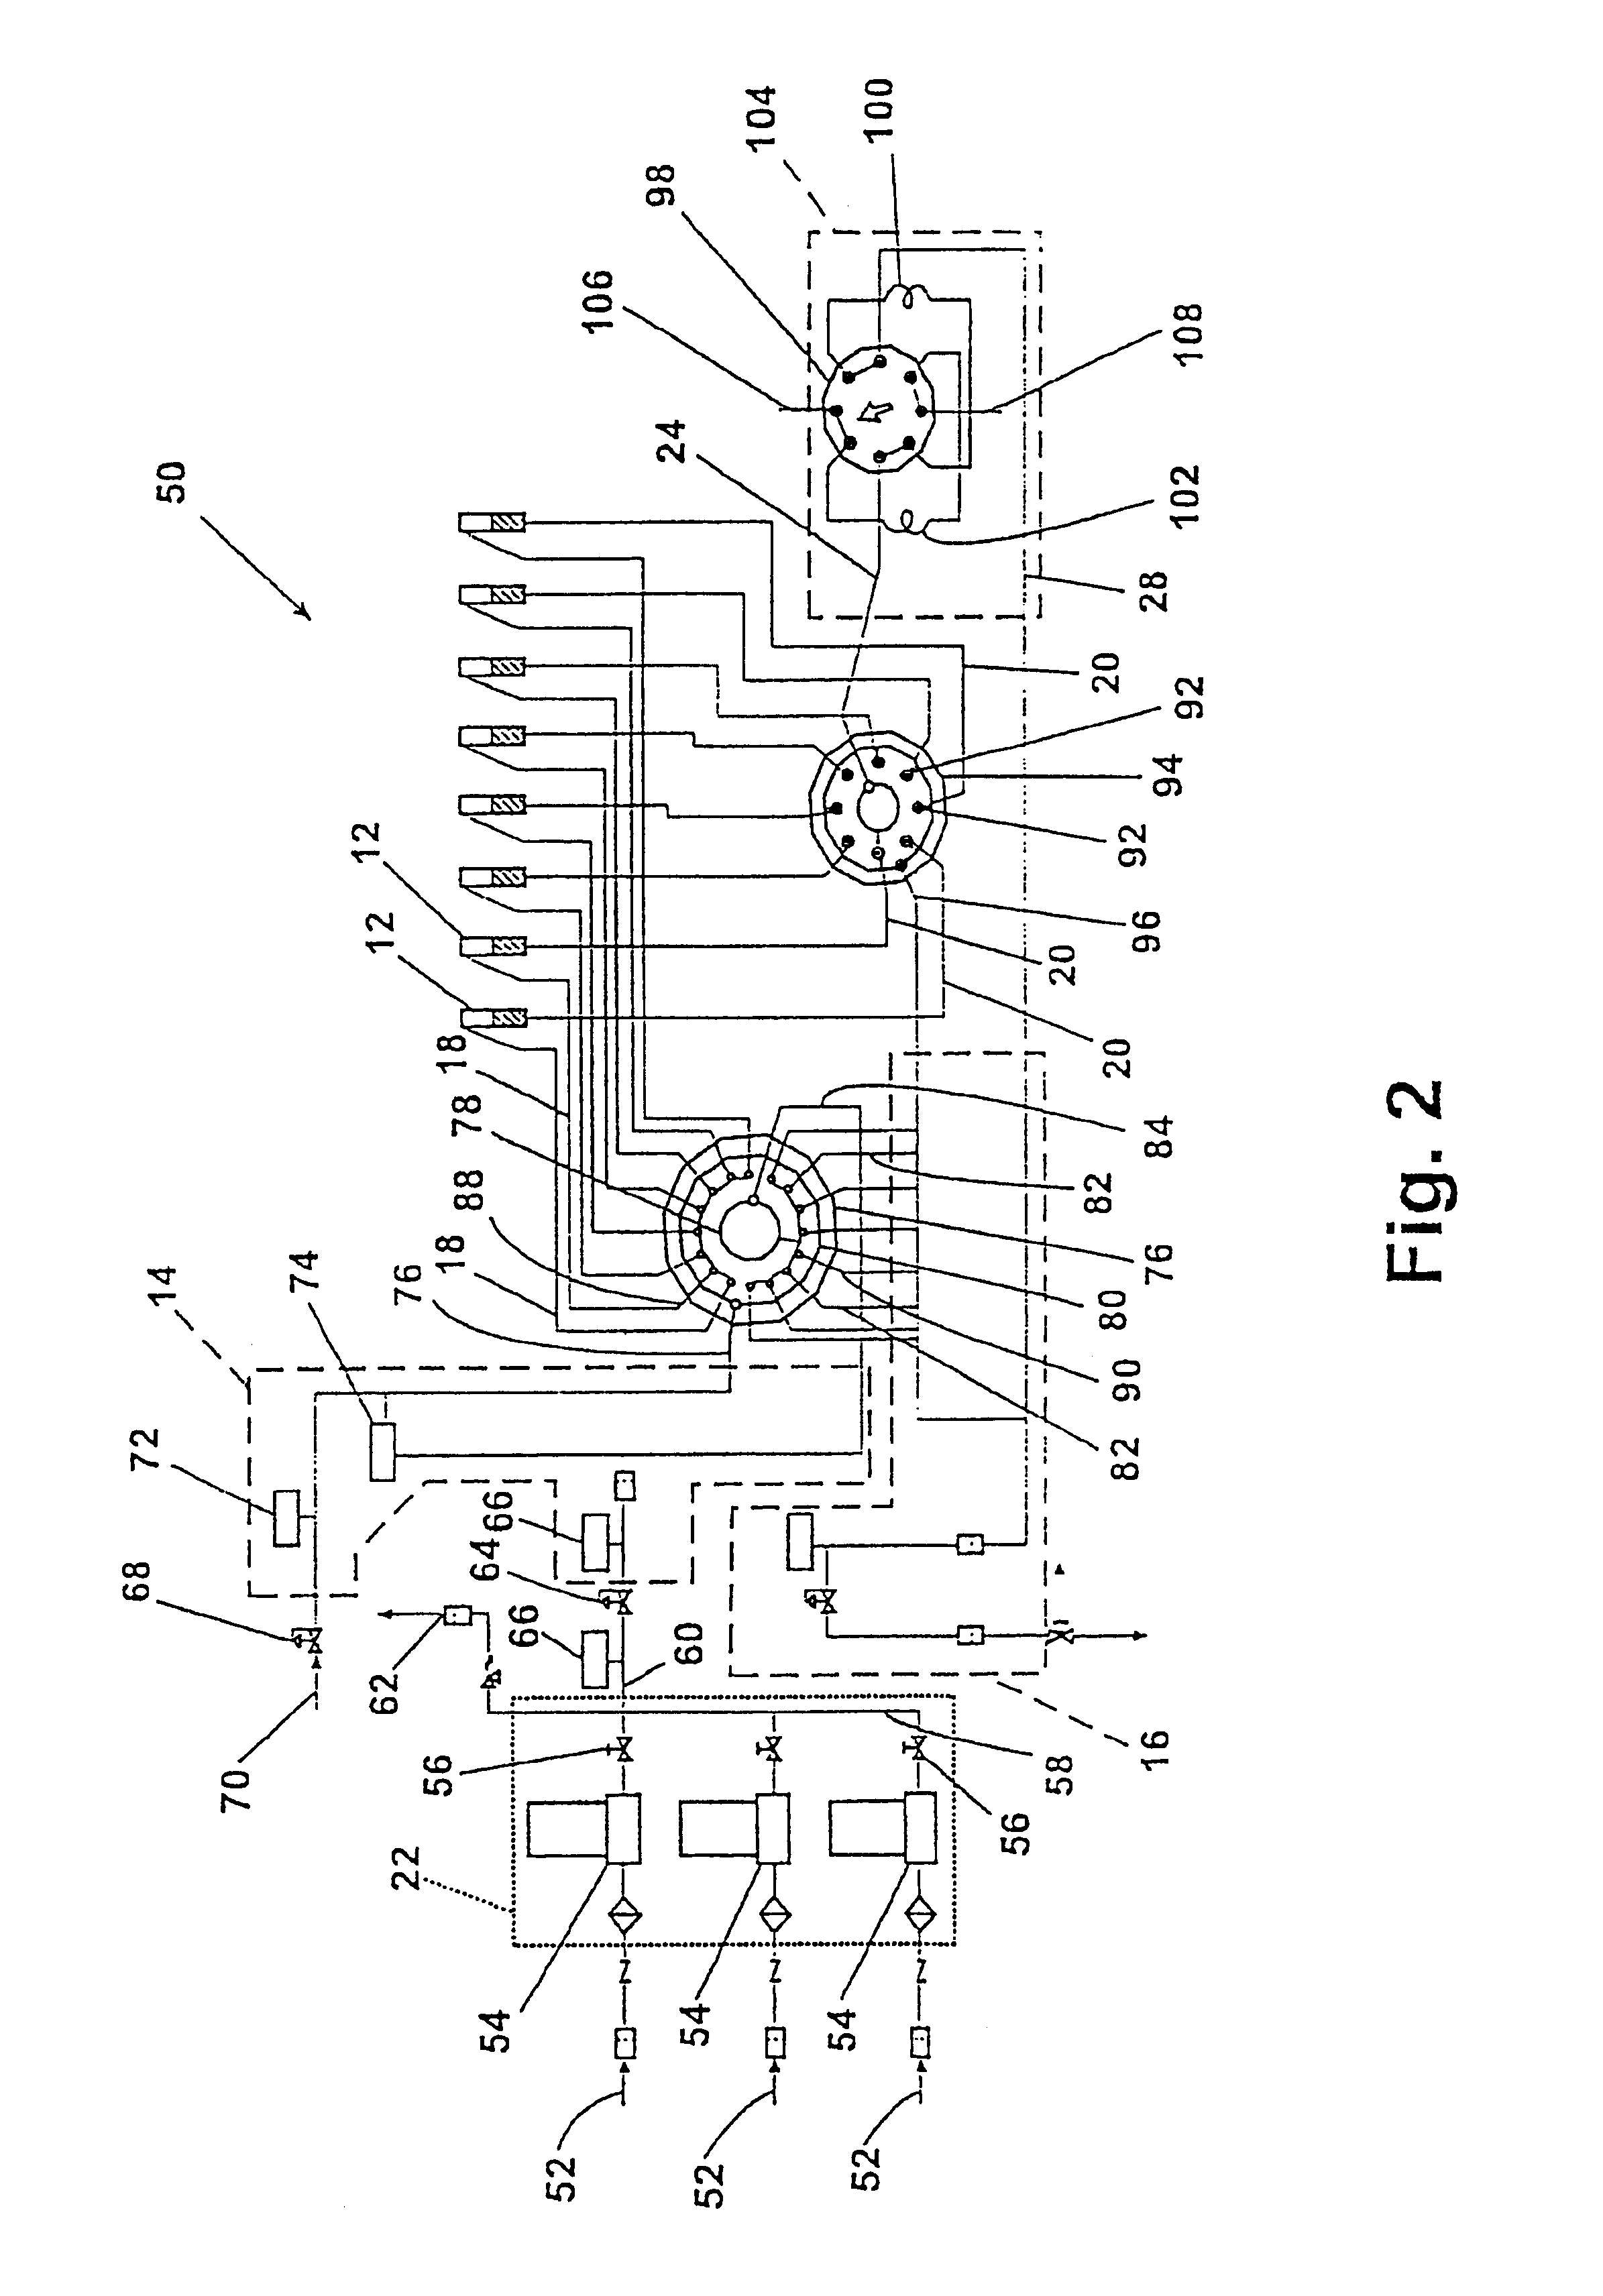 Methods for screening catalysts in a parallel fixed-bed reactor